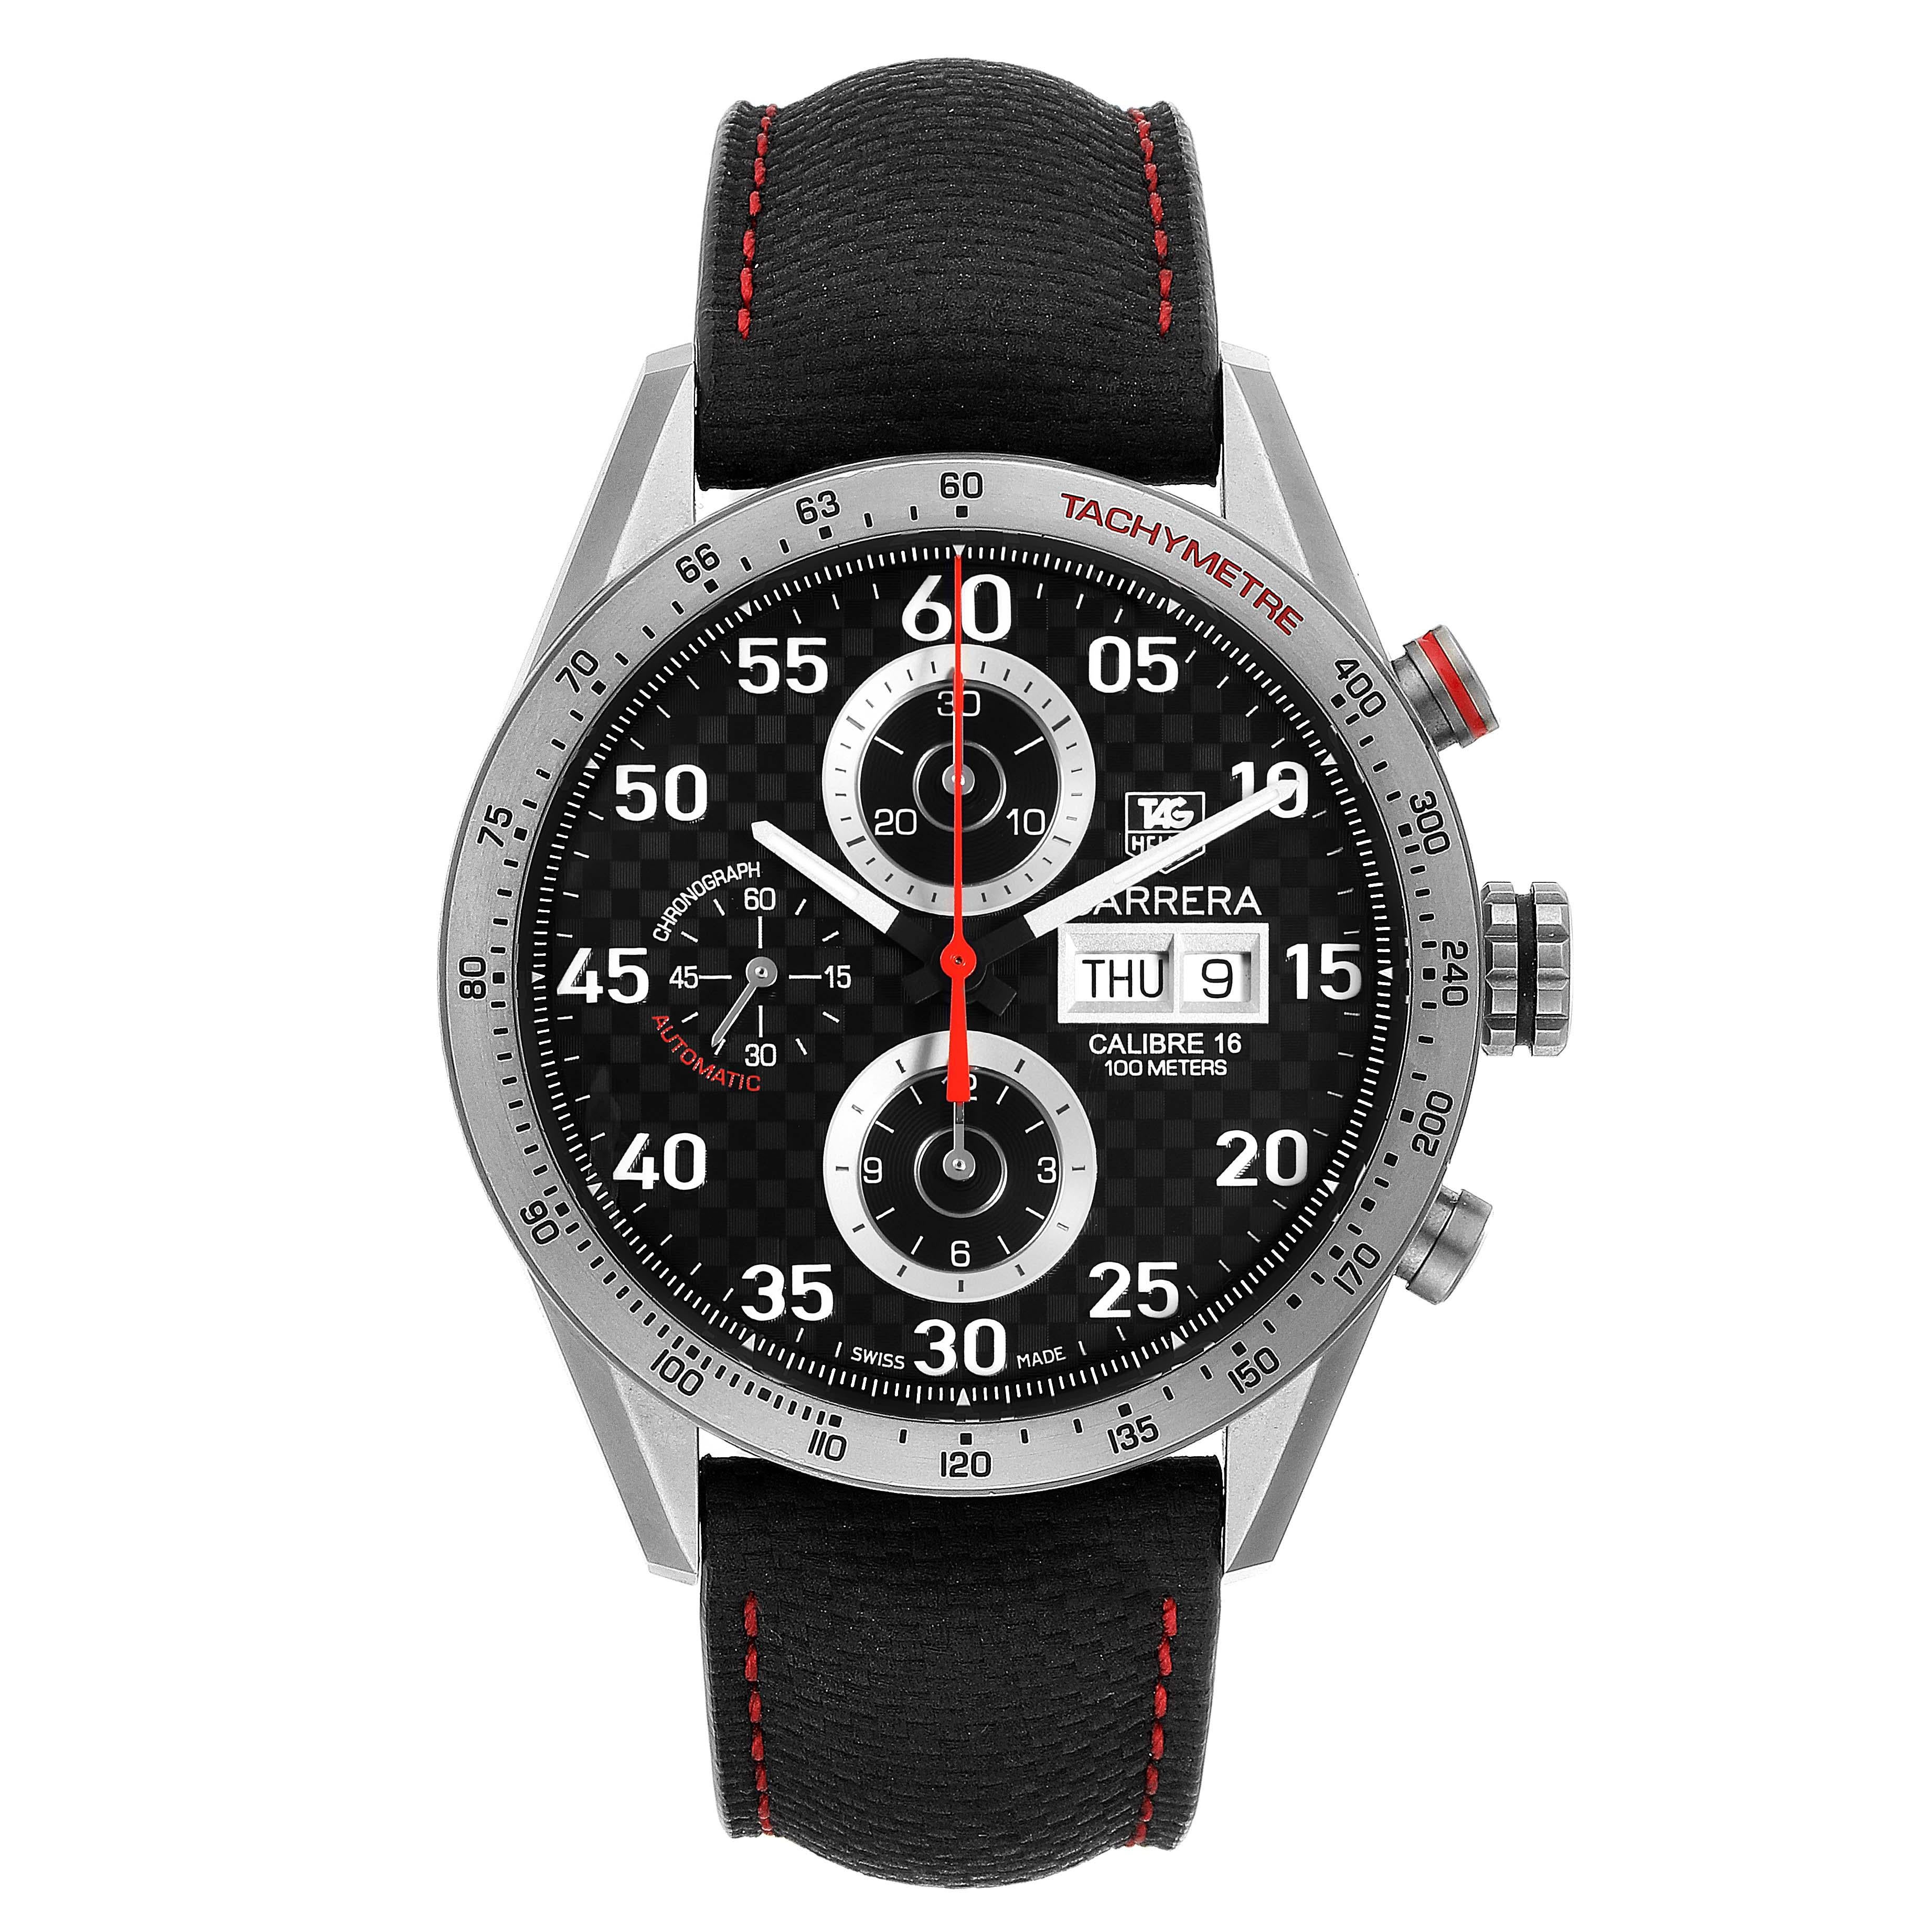 Tag Heuer Carrera Calibre 16 Titanium Day Date Mens Watch CV2A80 Box Card. Automatic self-winding chronograph movement. Grey brushed titanium case 43.0 mm. Case thickness 16.3 mm. Transperent sapphire crystal back. Titanium bezel with tachymeter